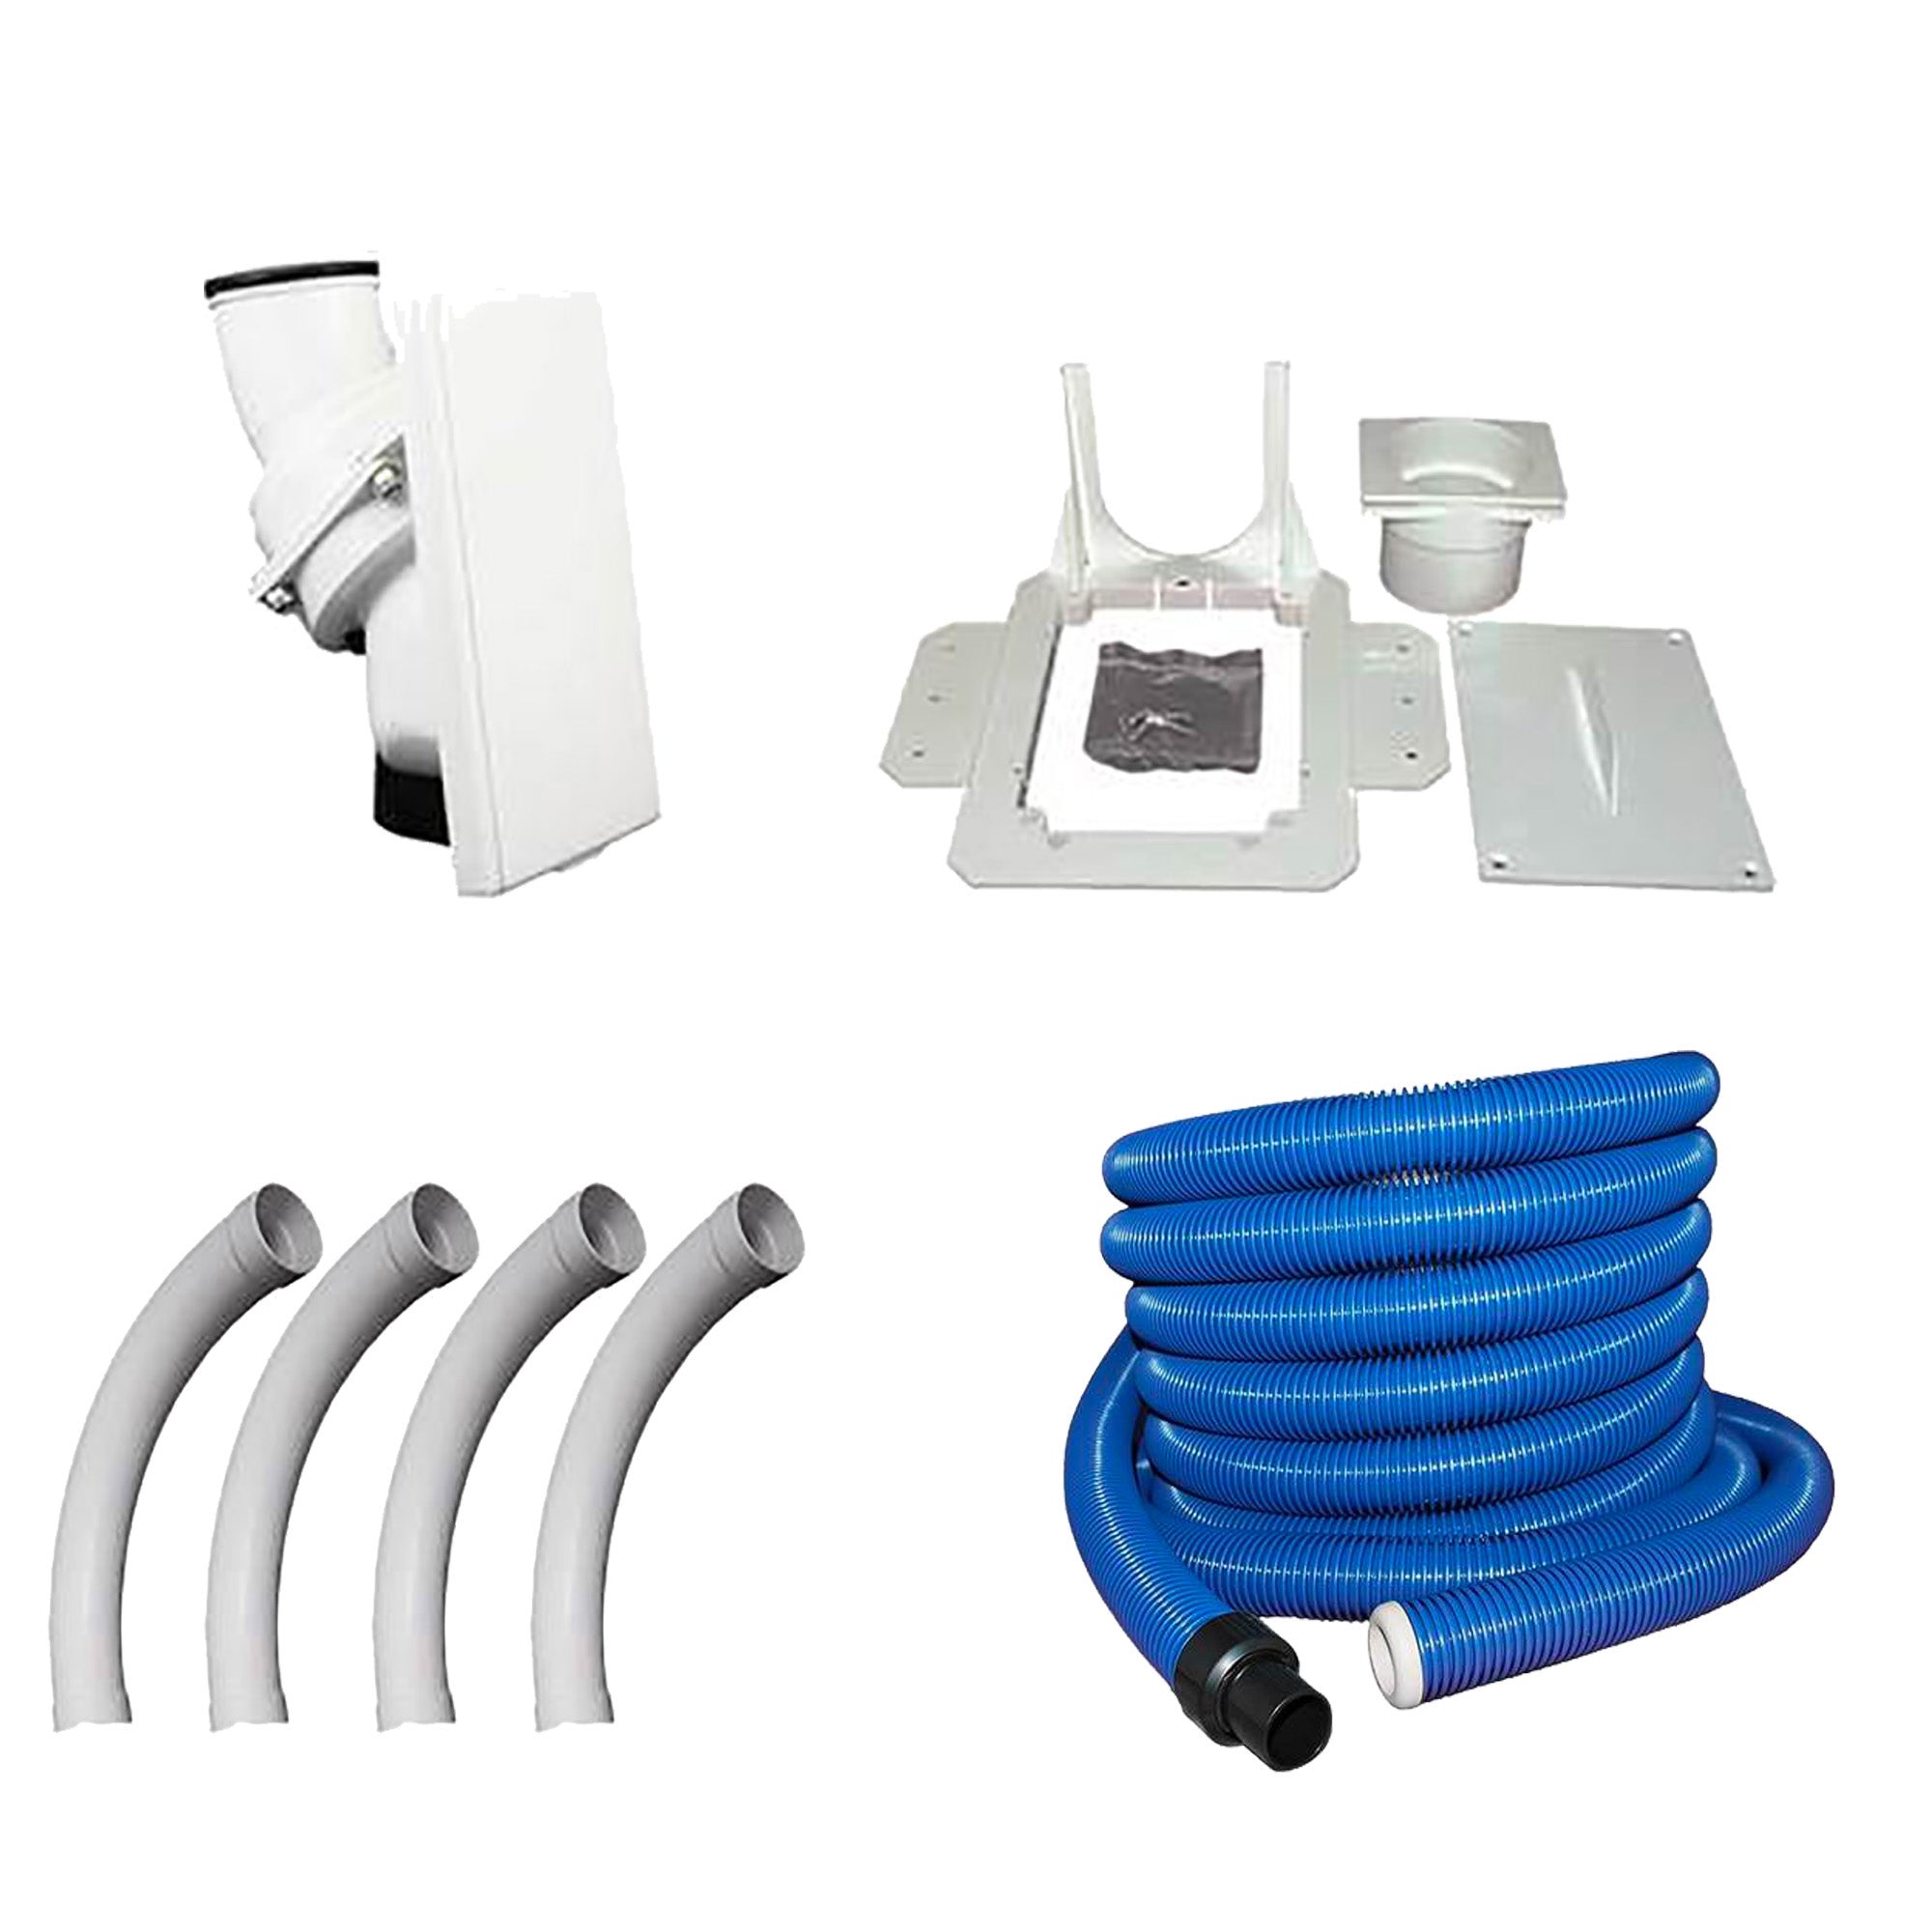 Retractable Hose Installation Kit with Blue Hose